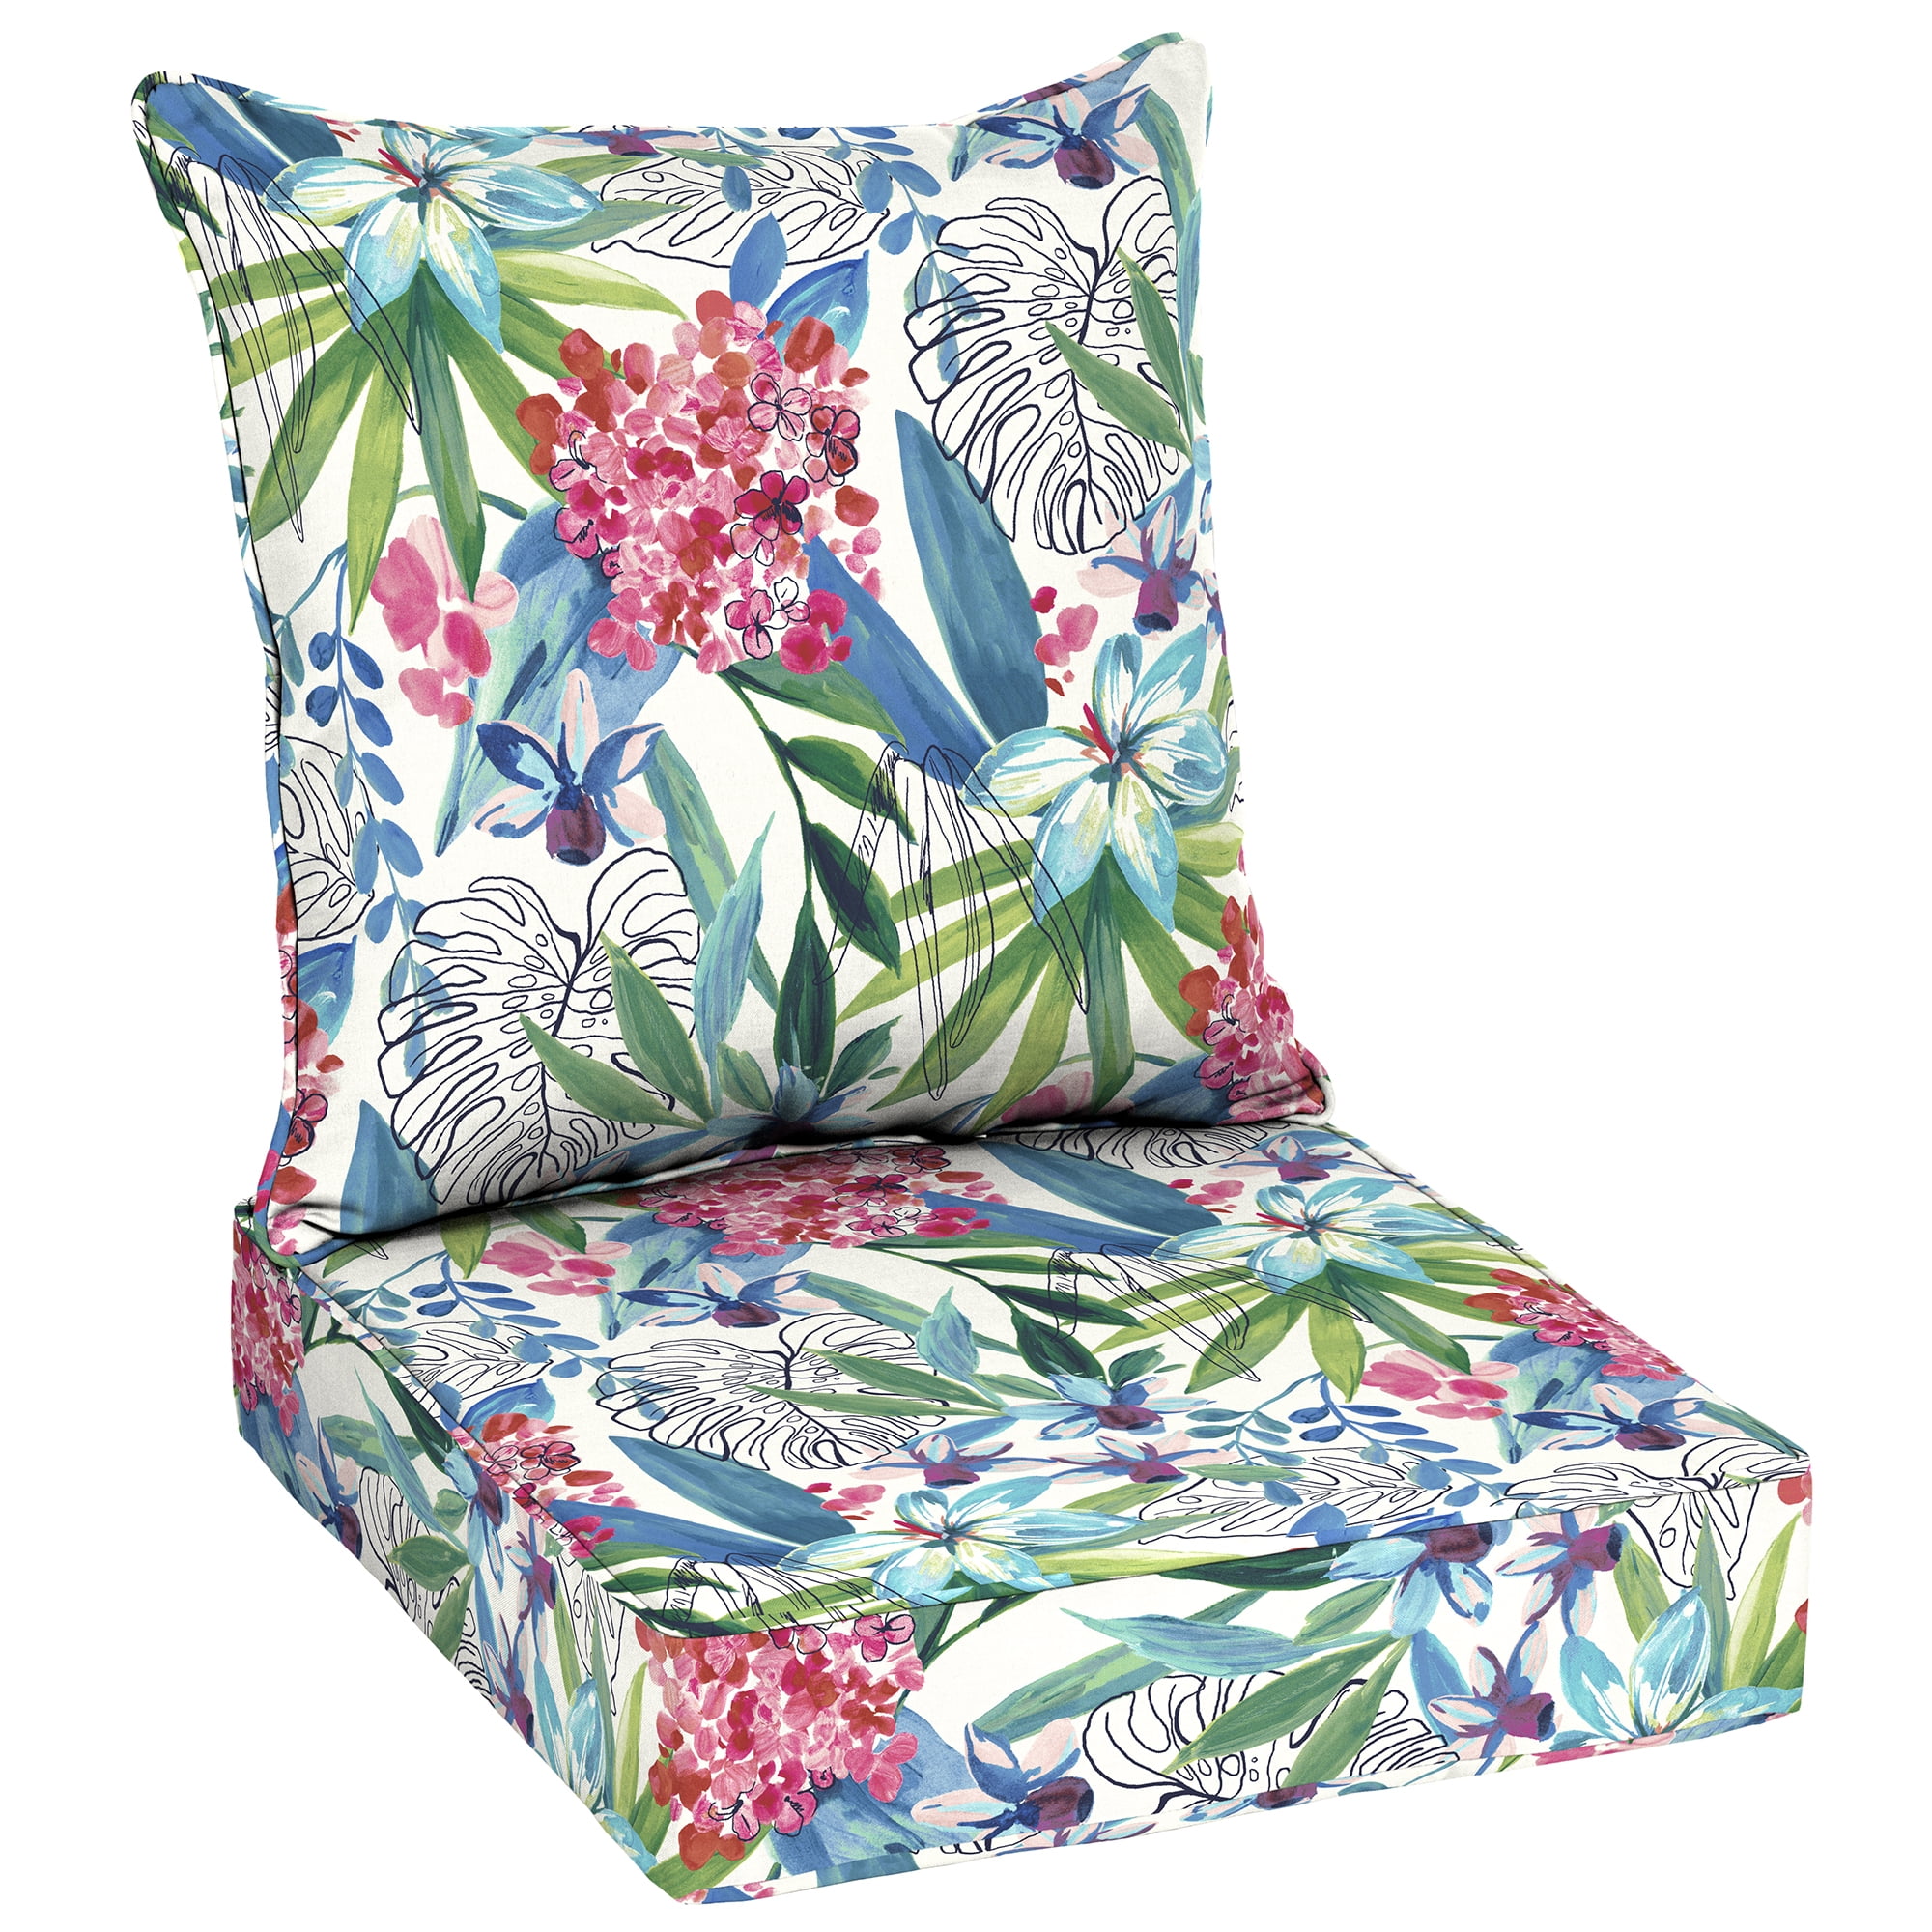 Better Homes & Gardens Painterly Tropical 48 x 24 in. Outdoor Deep Seat